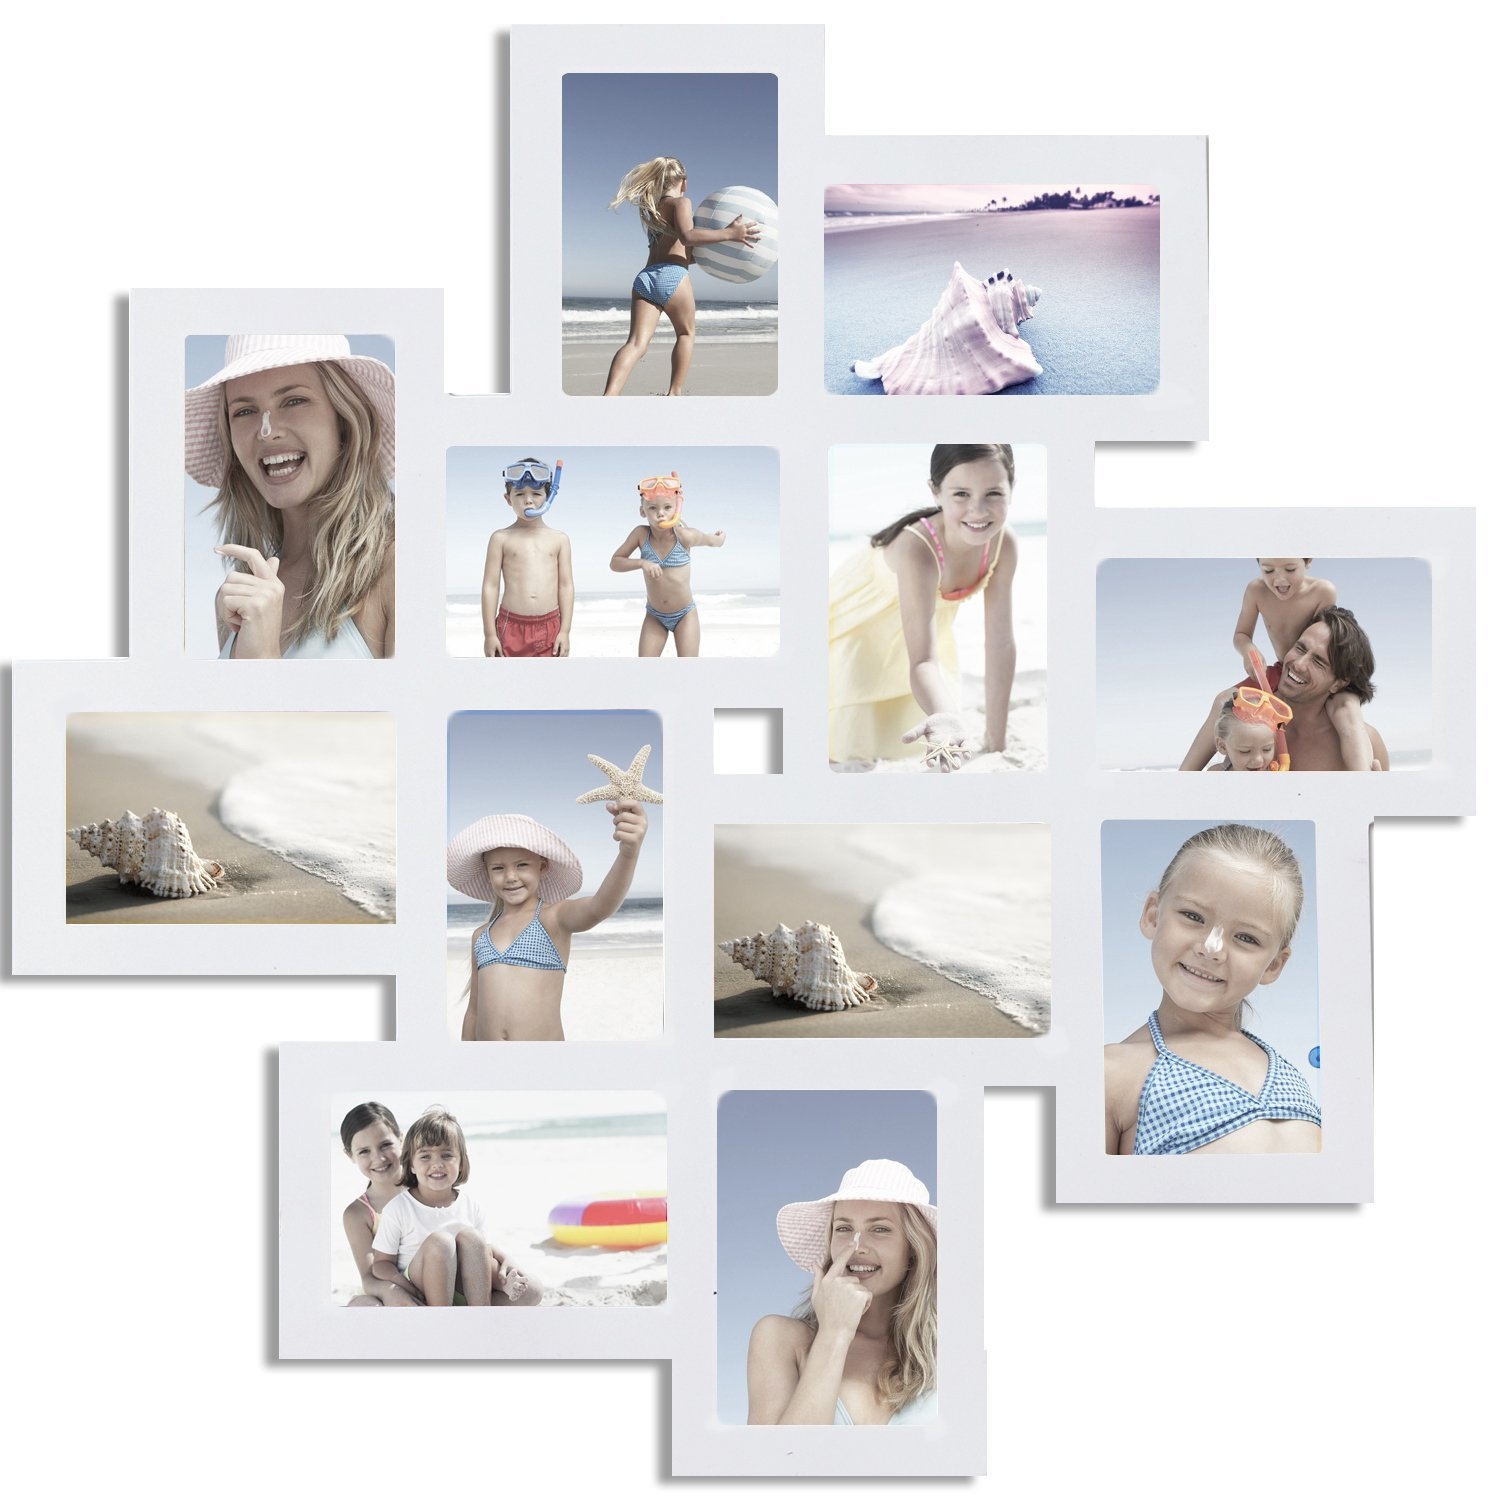 12-opening Wall Collage Photo Picture Frame -XSJ205 ADECO -Wall Art Home Decor , Holds Six 4-by-6-inch and Six 6-by-4-inch Photos Great Gift,Wooden,White